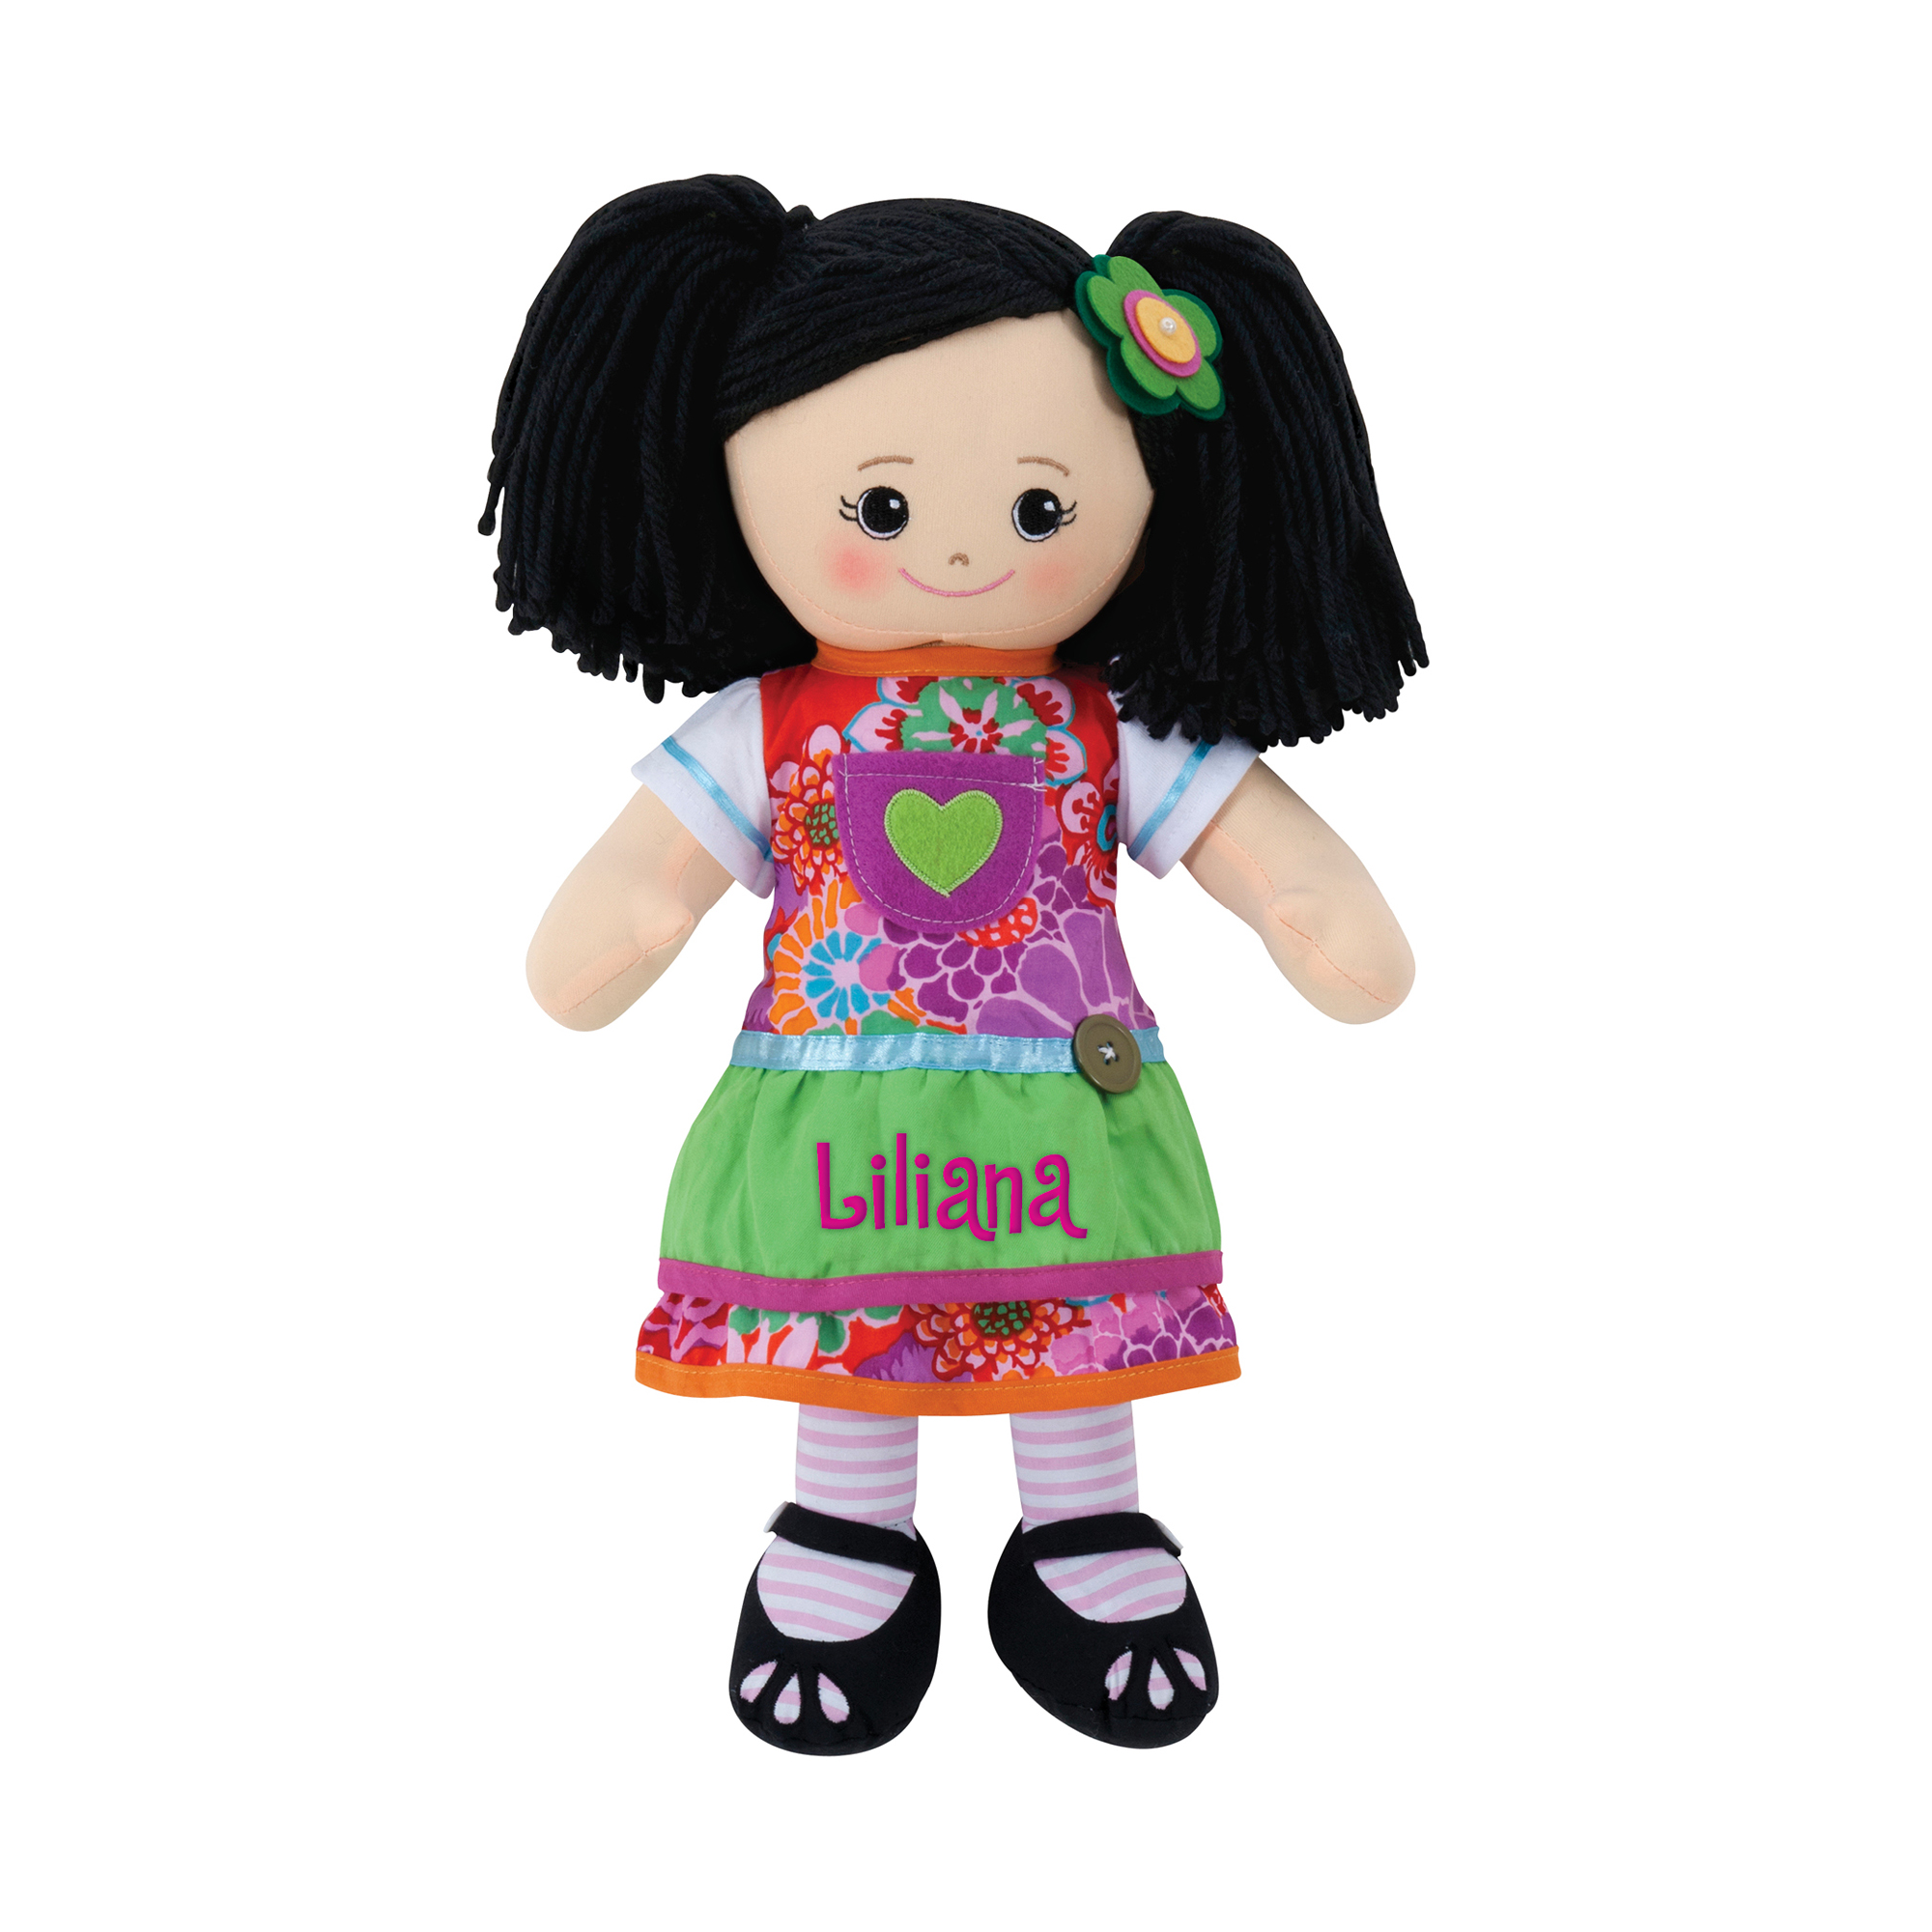 Personalized Asian Doll with Green Apron Dress and Hair Clip